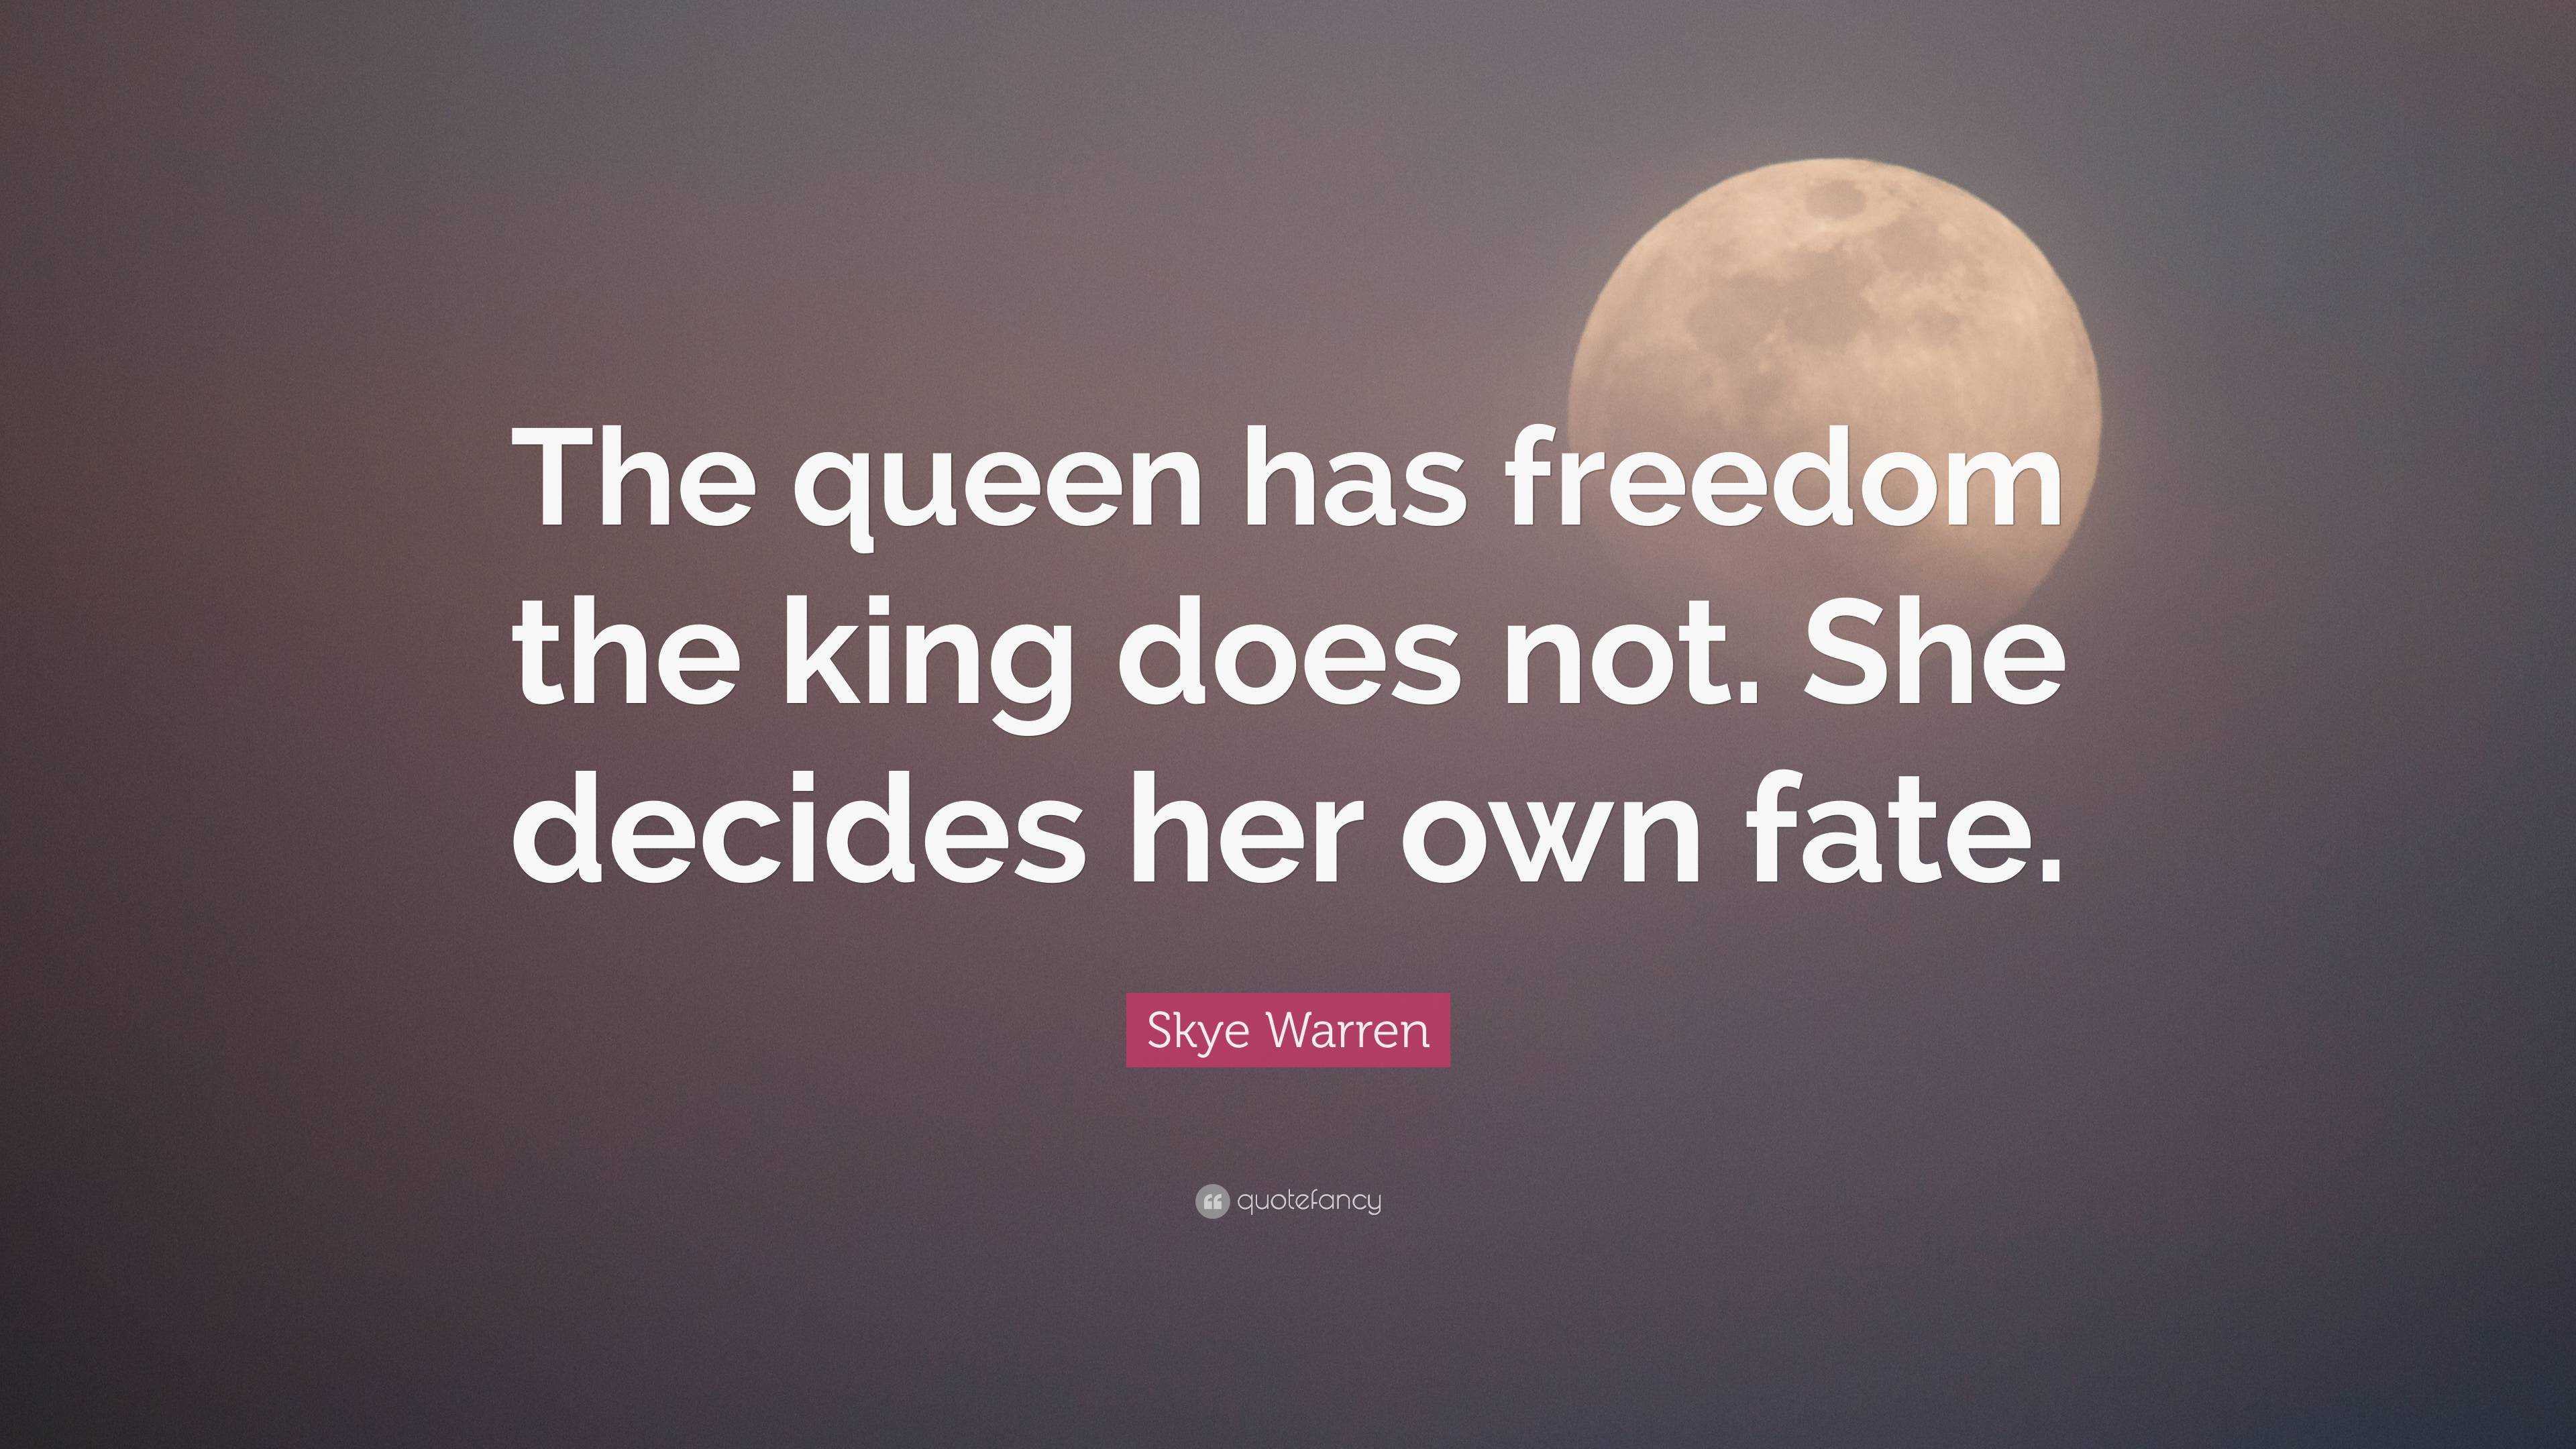 Skye Warren Quote: “The queen has freedom the king does not. She ...